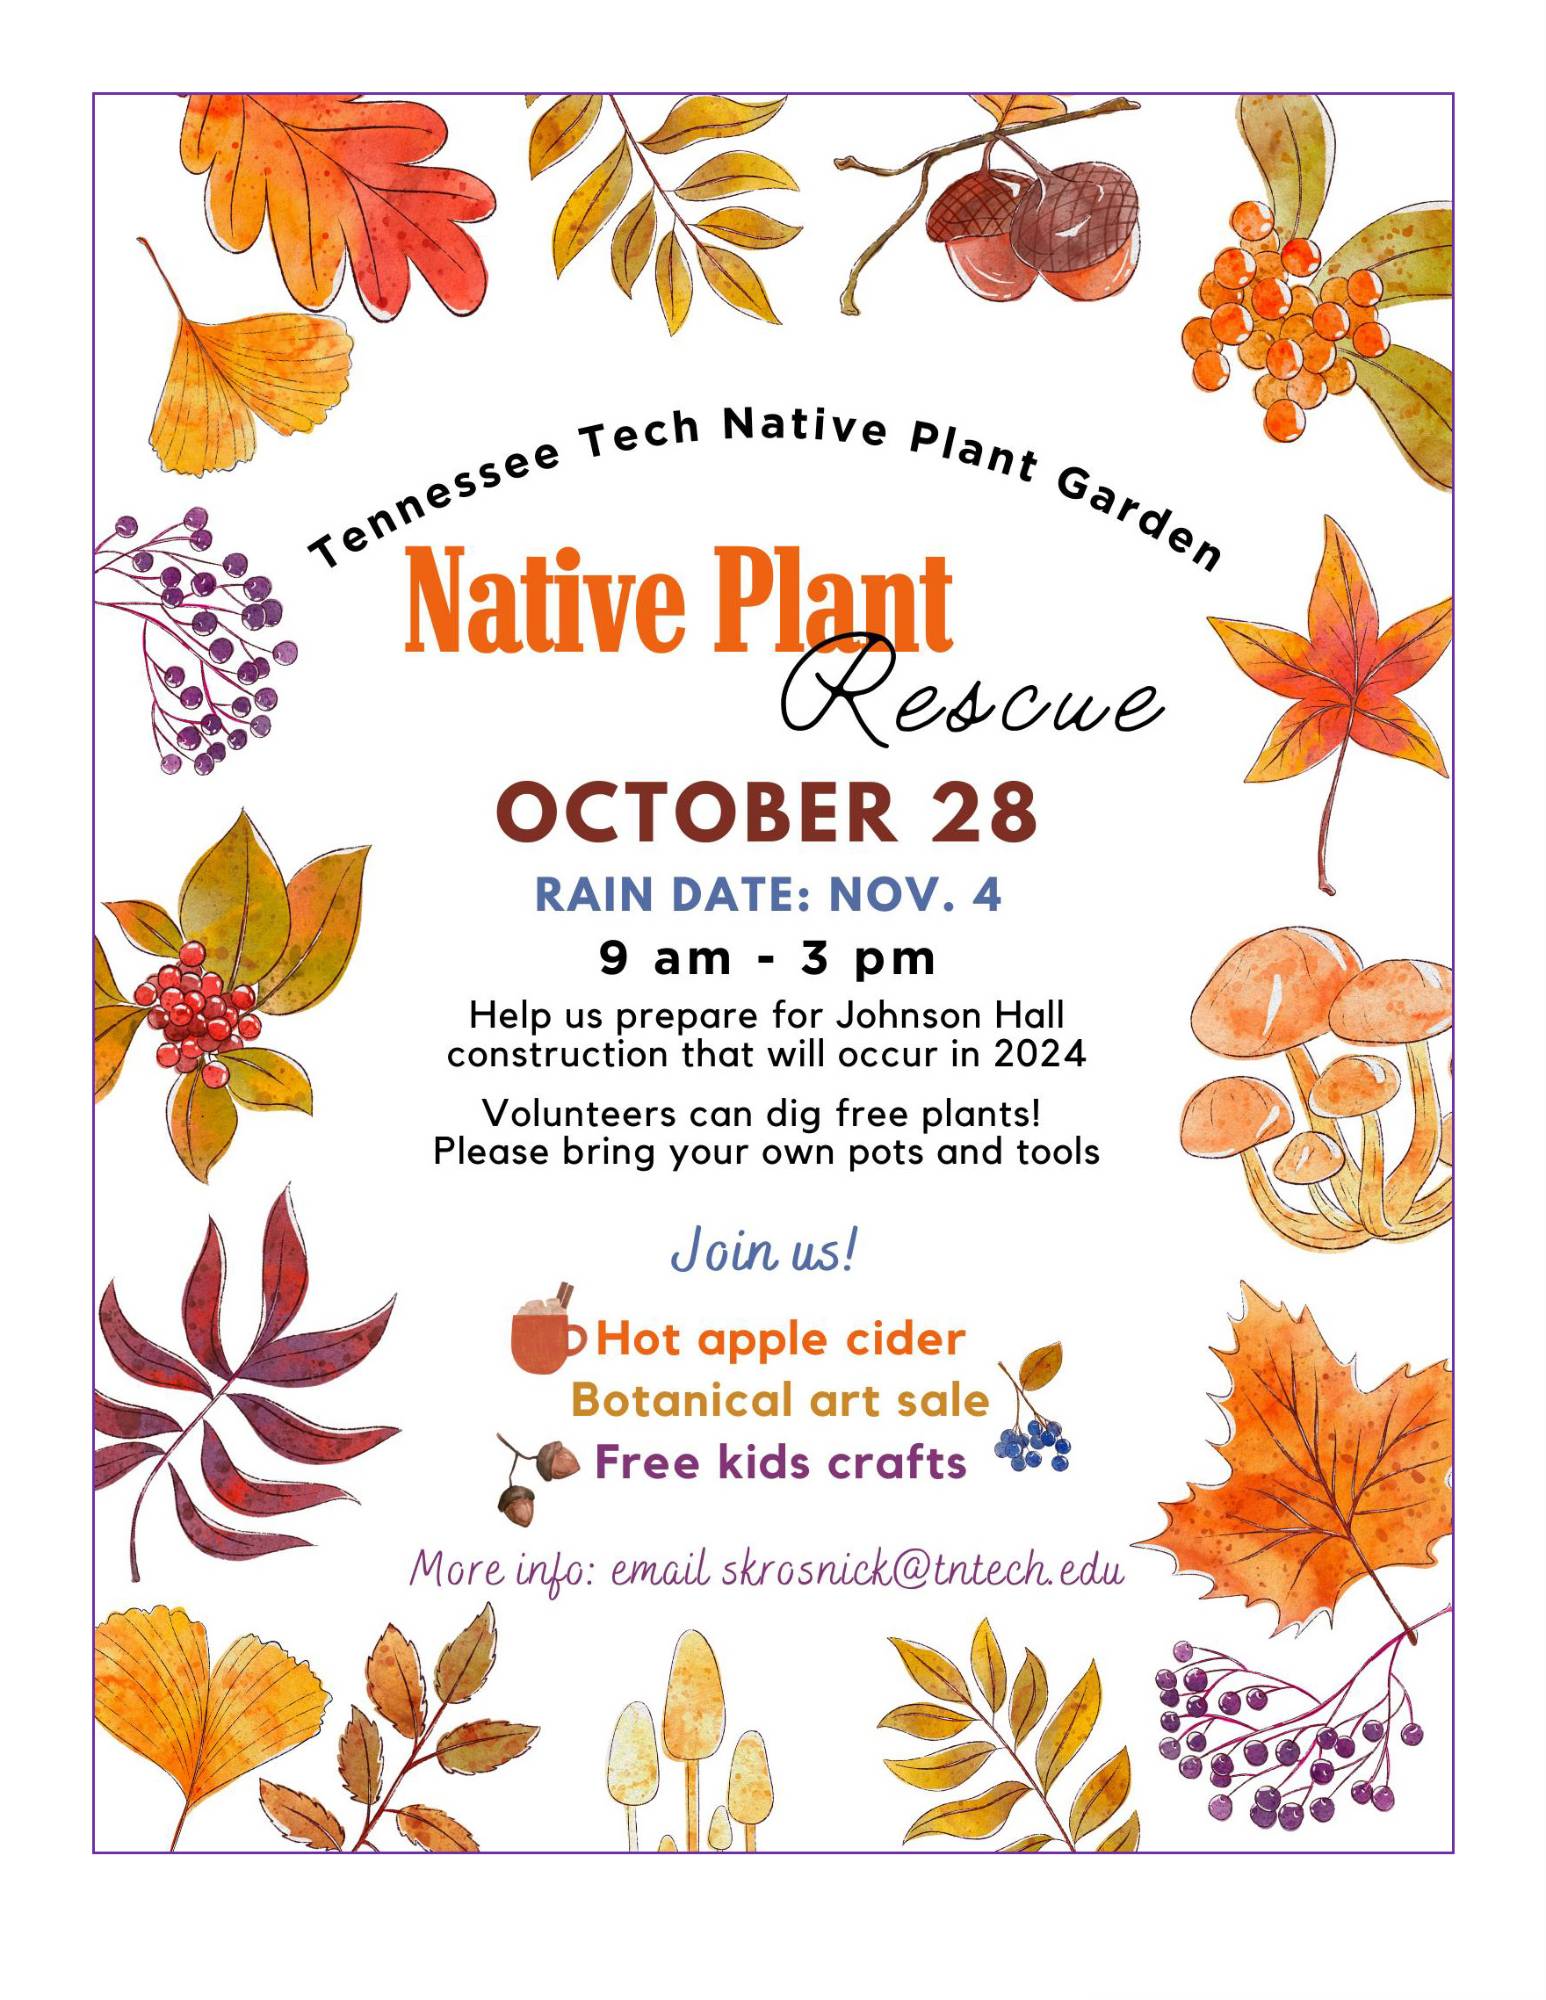 Native Plant Rescue flyer, Oct. 28 9 AM to 3 PM at the native plant garden, rain date Nov. 4